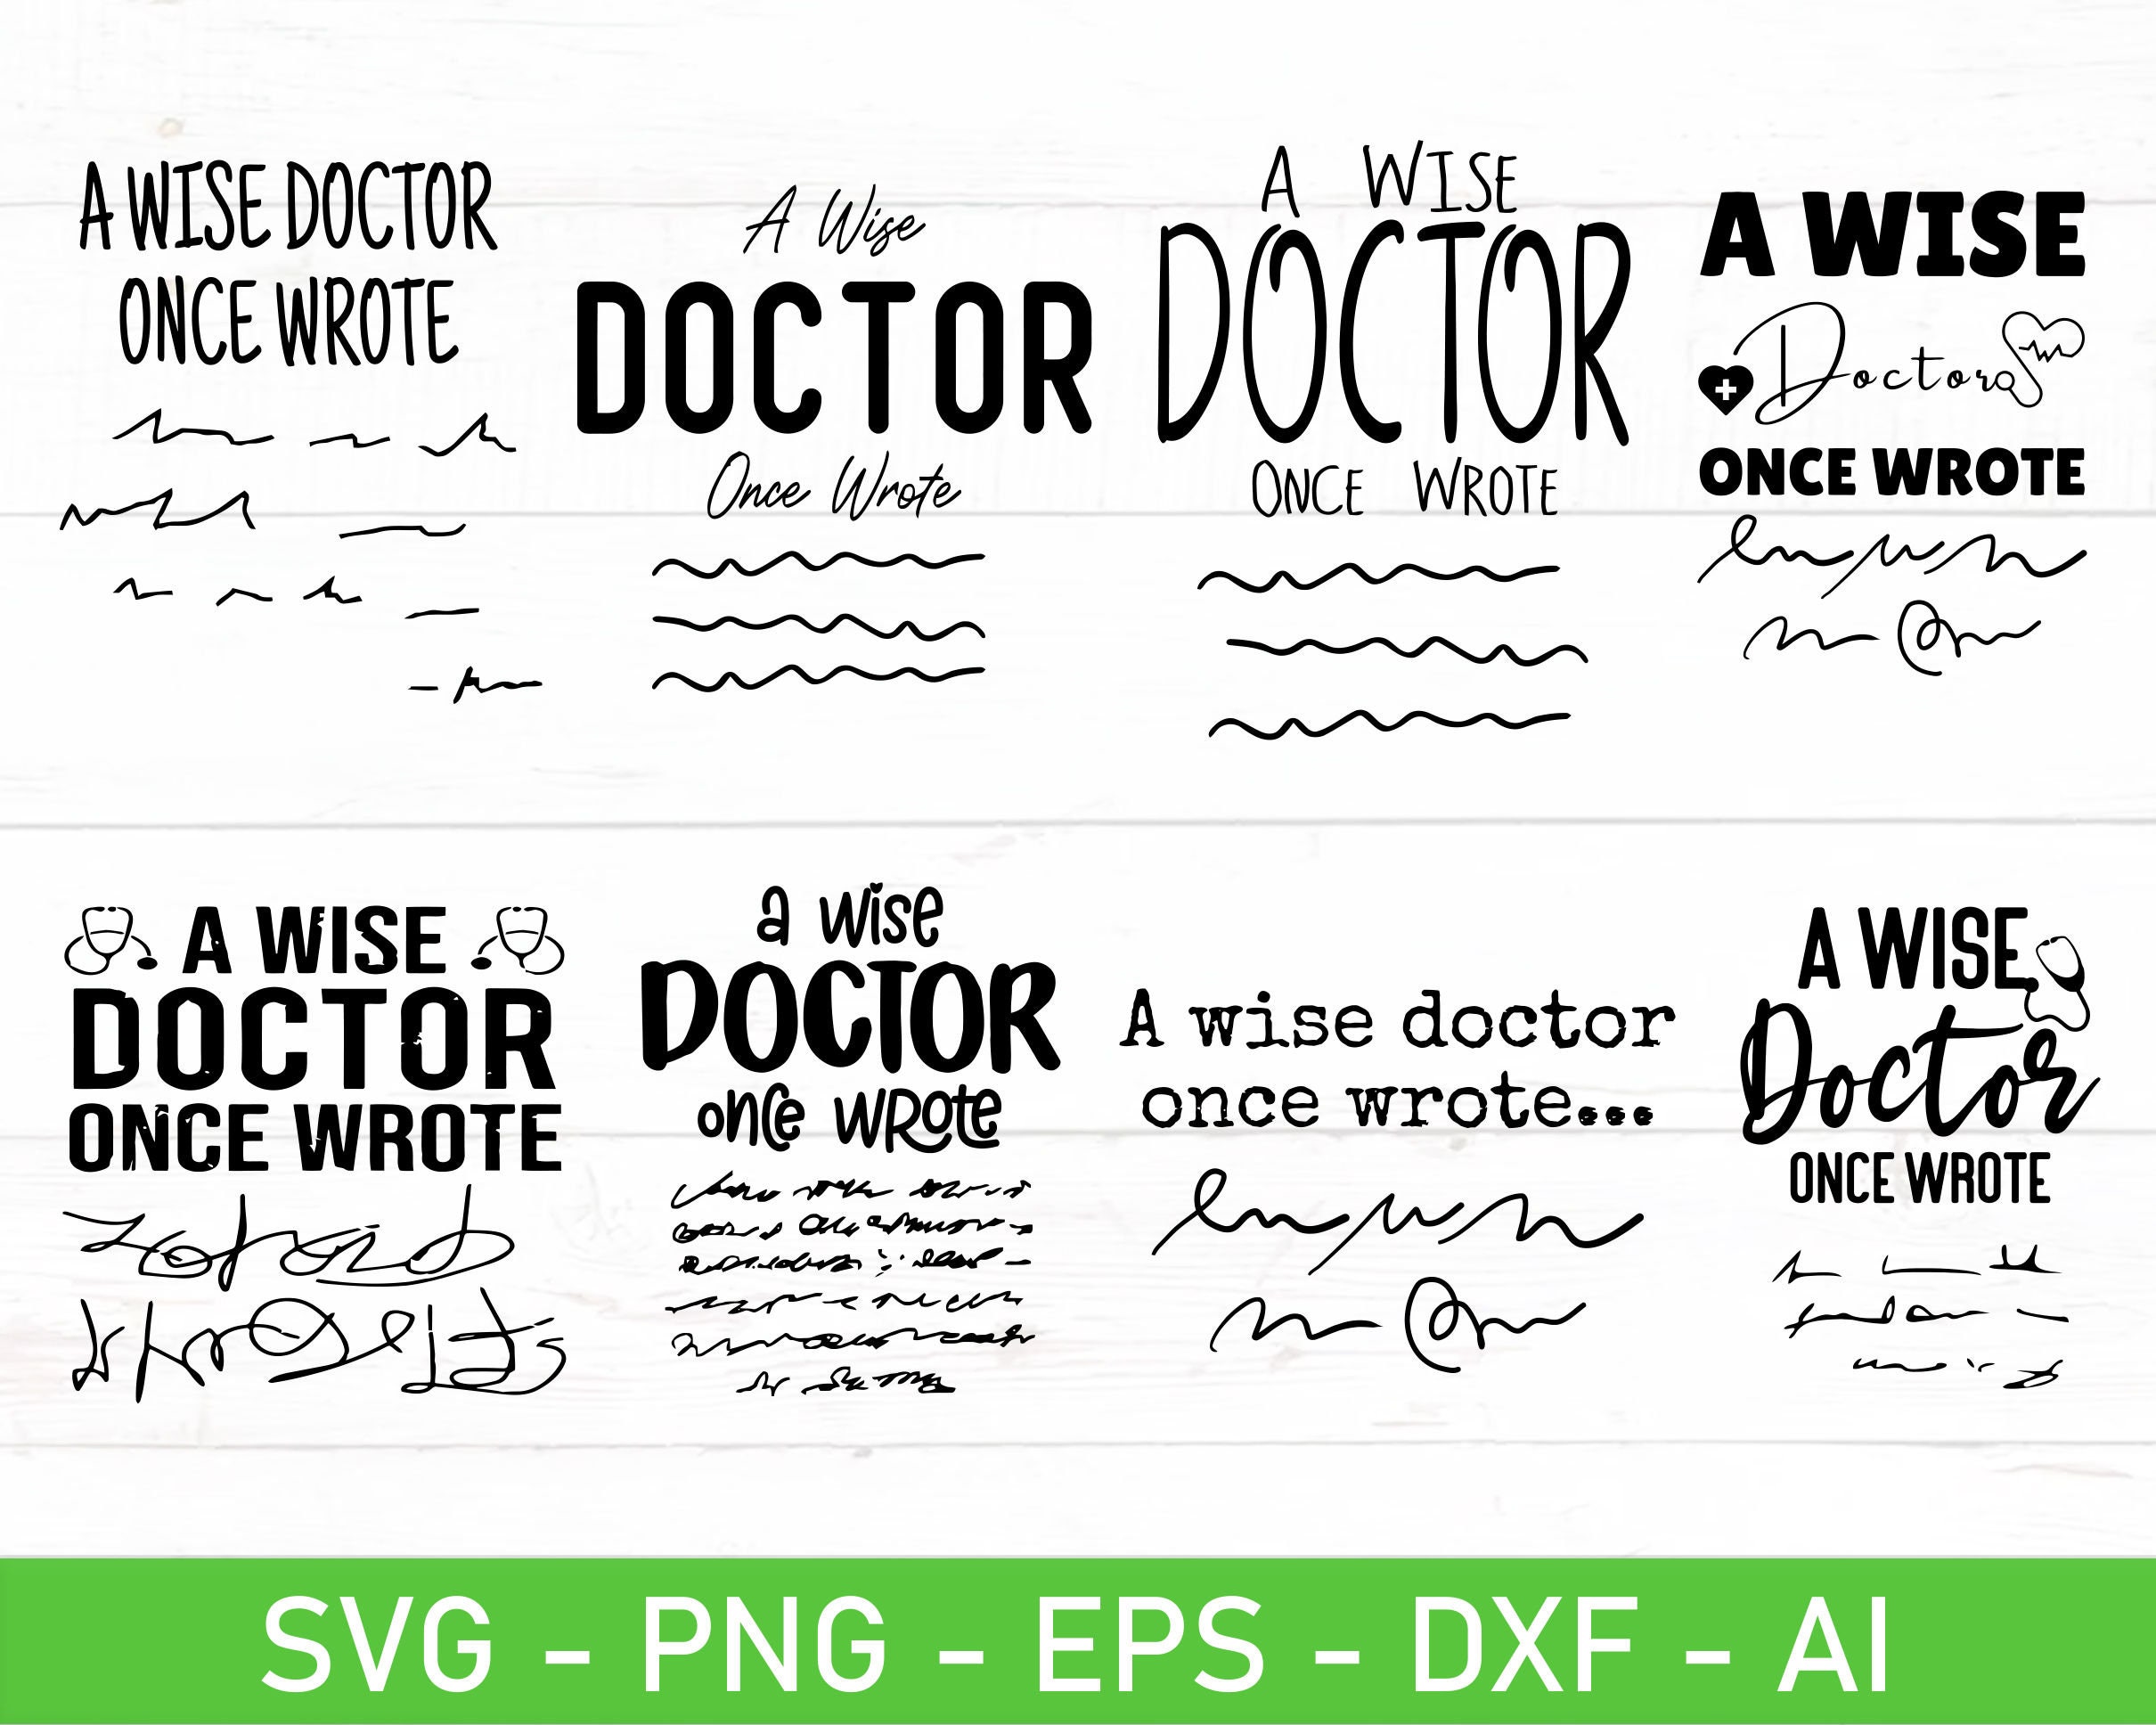 A Wise Doctor Once Wrote Graphic by inappropriateSVGs · Creative Fabrica